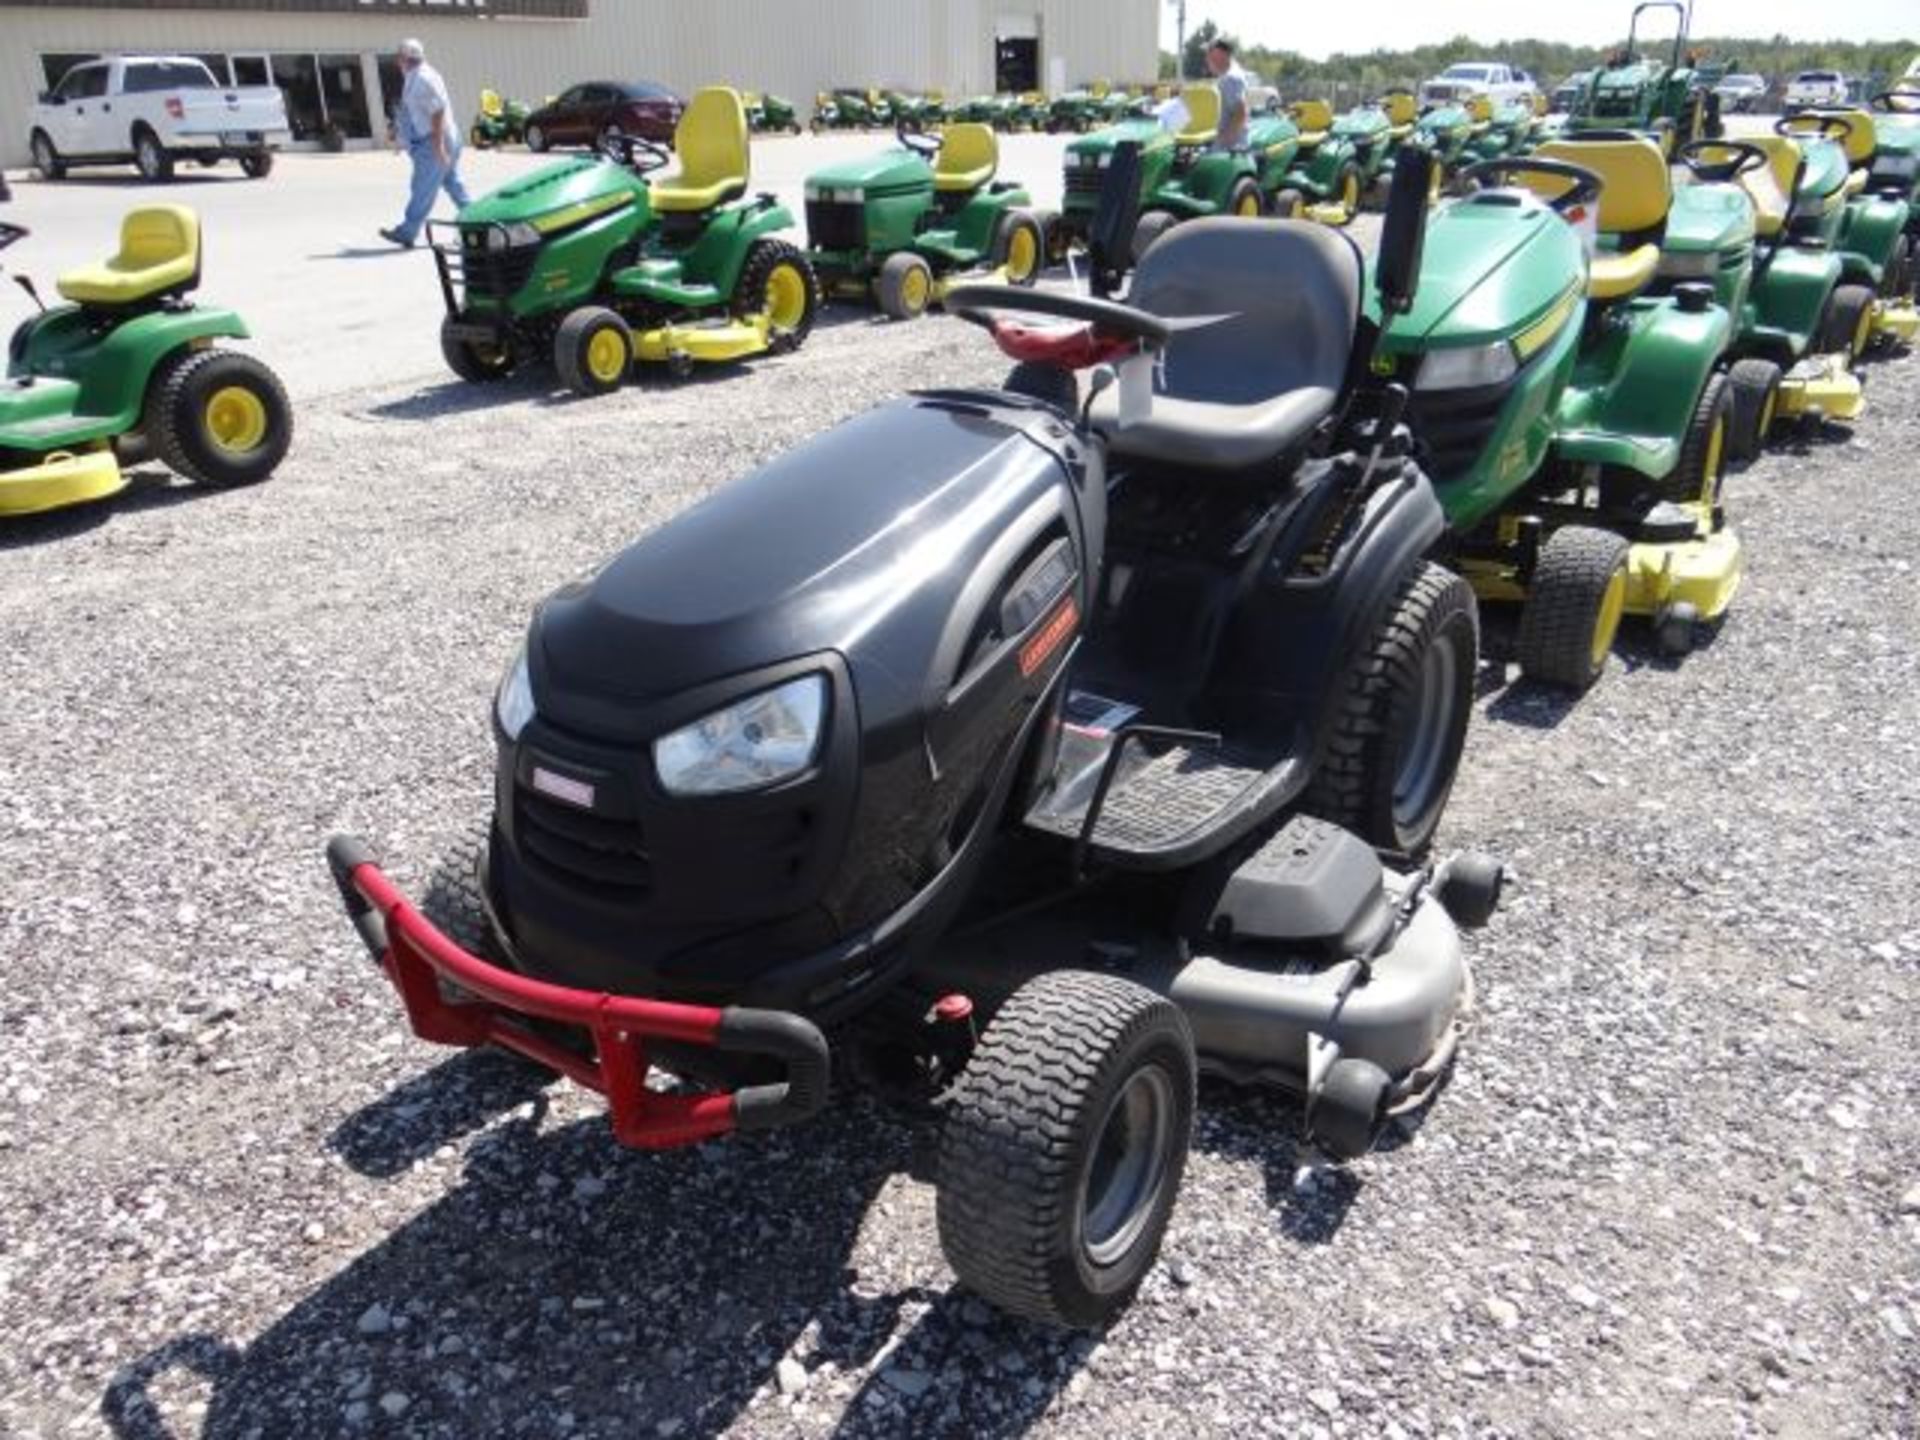 Craftsman GT6000 Mower 357 Hrs, 26 HP Kolher, Air Cooled, Hydro, 54" - Image 2 of 4